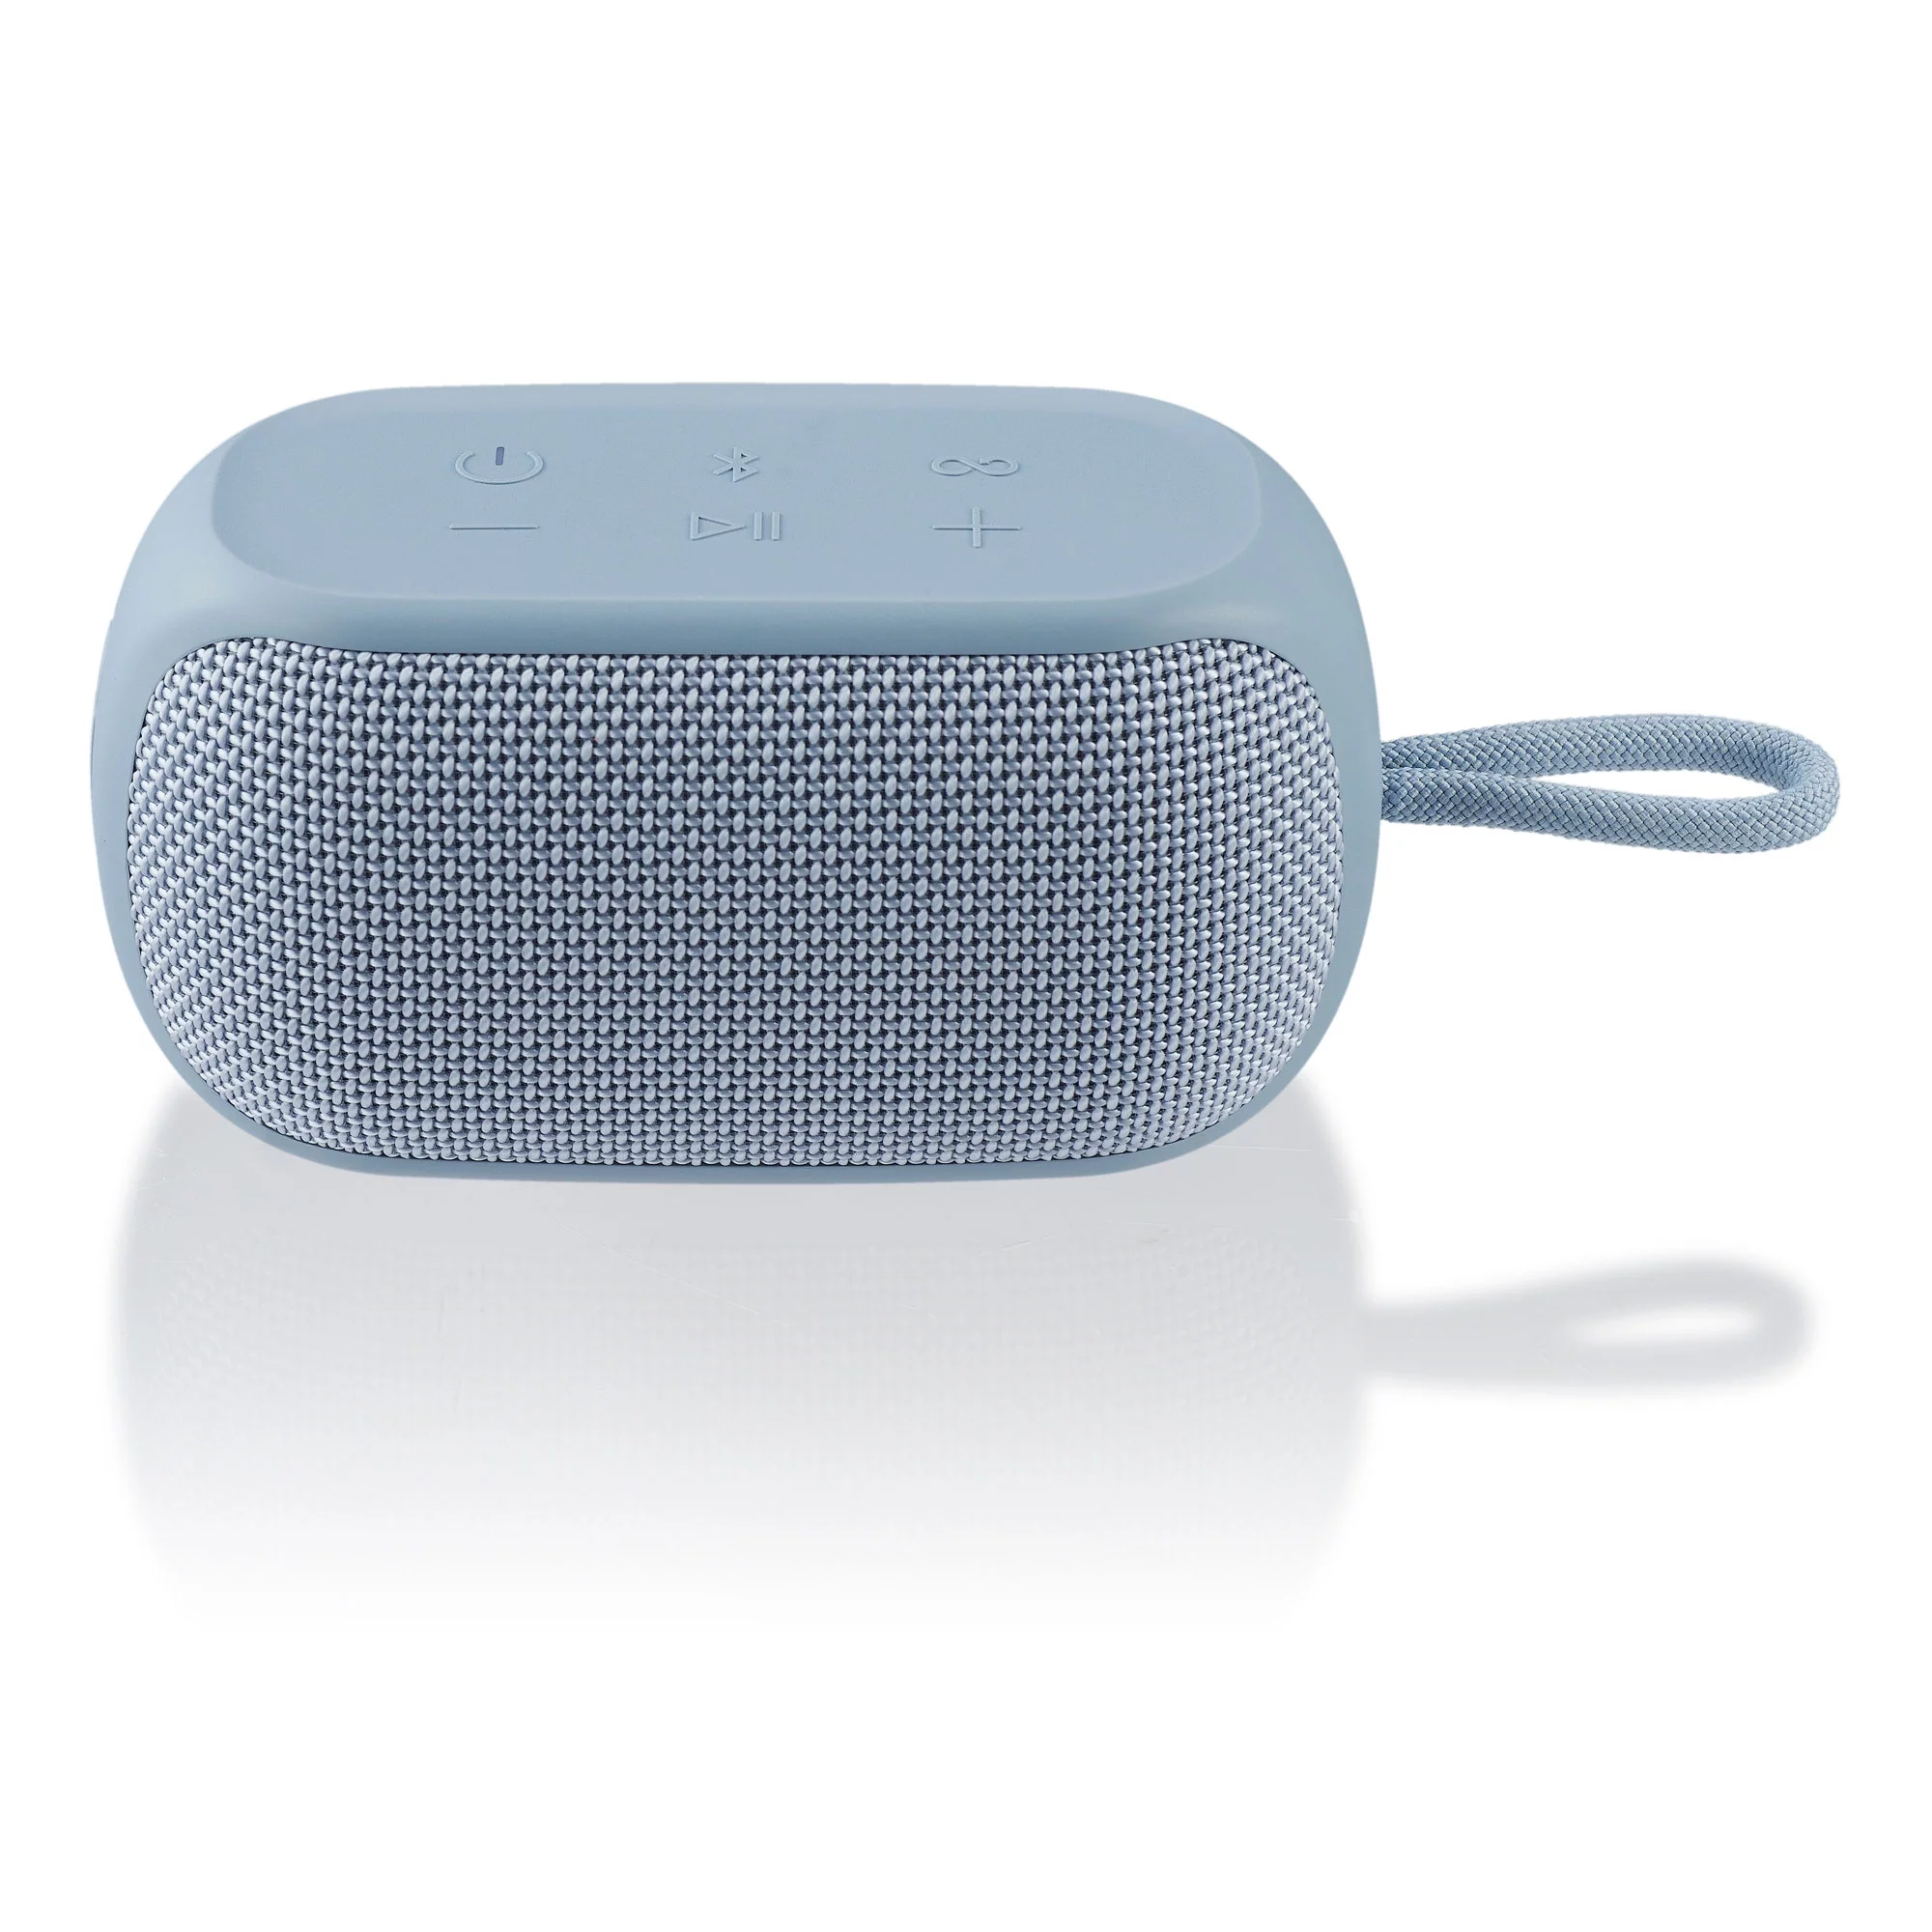 onn. Small Rugged Speaker with Bluetooth Wireless Technology, Blue